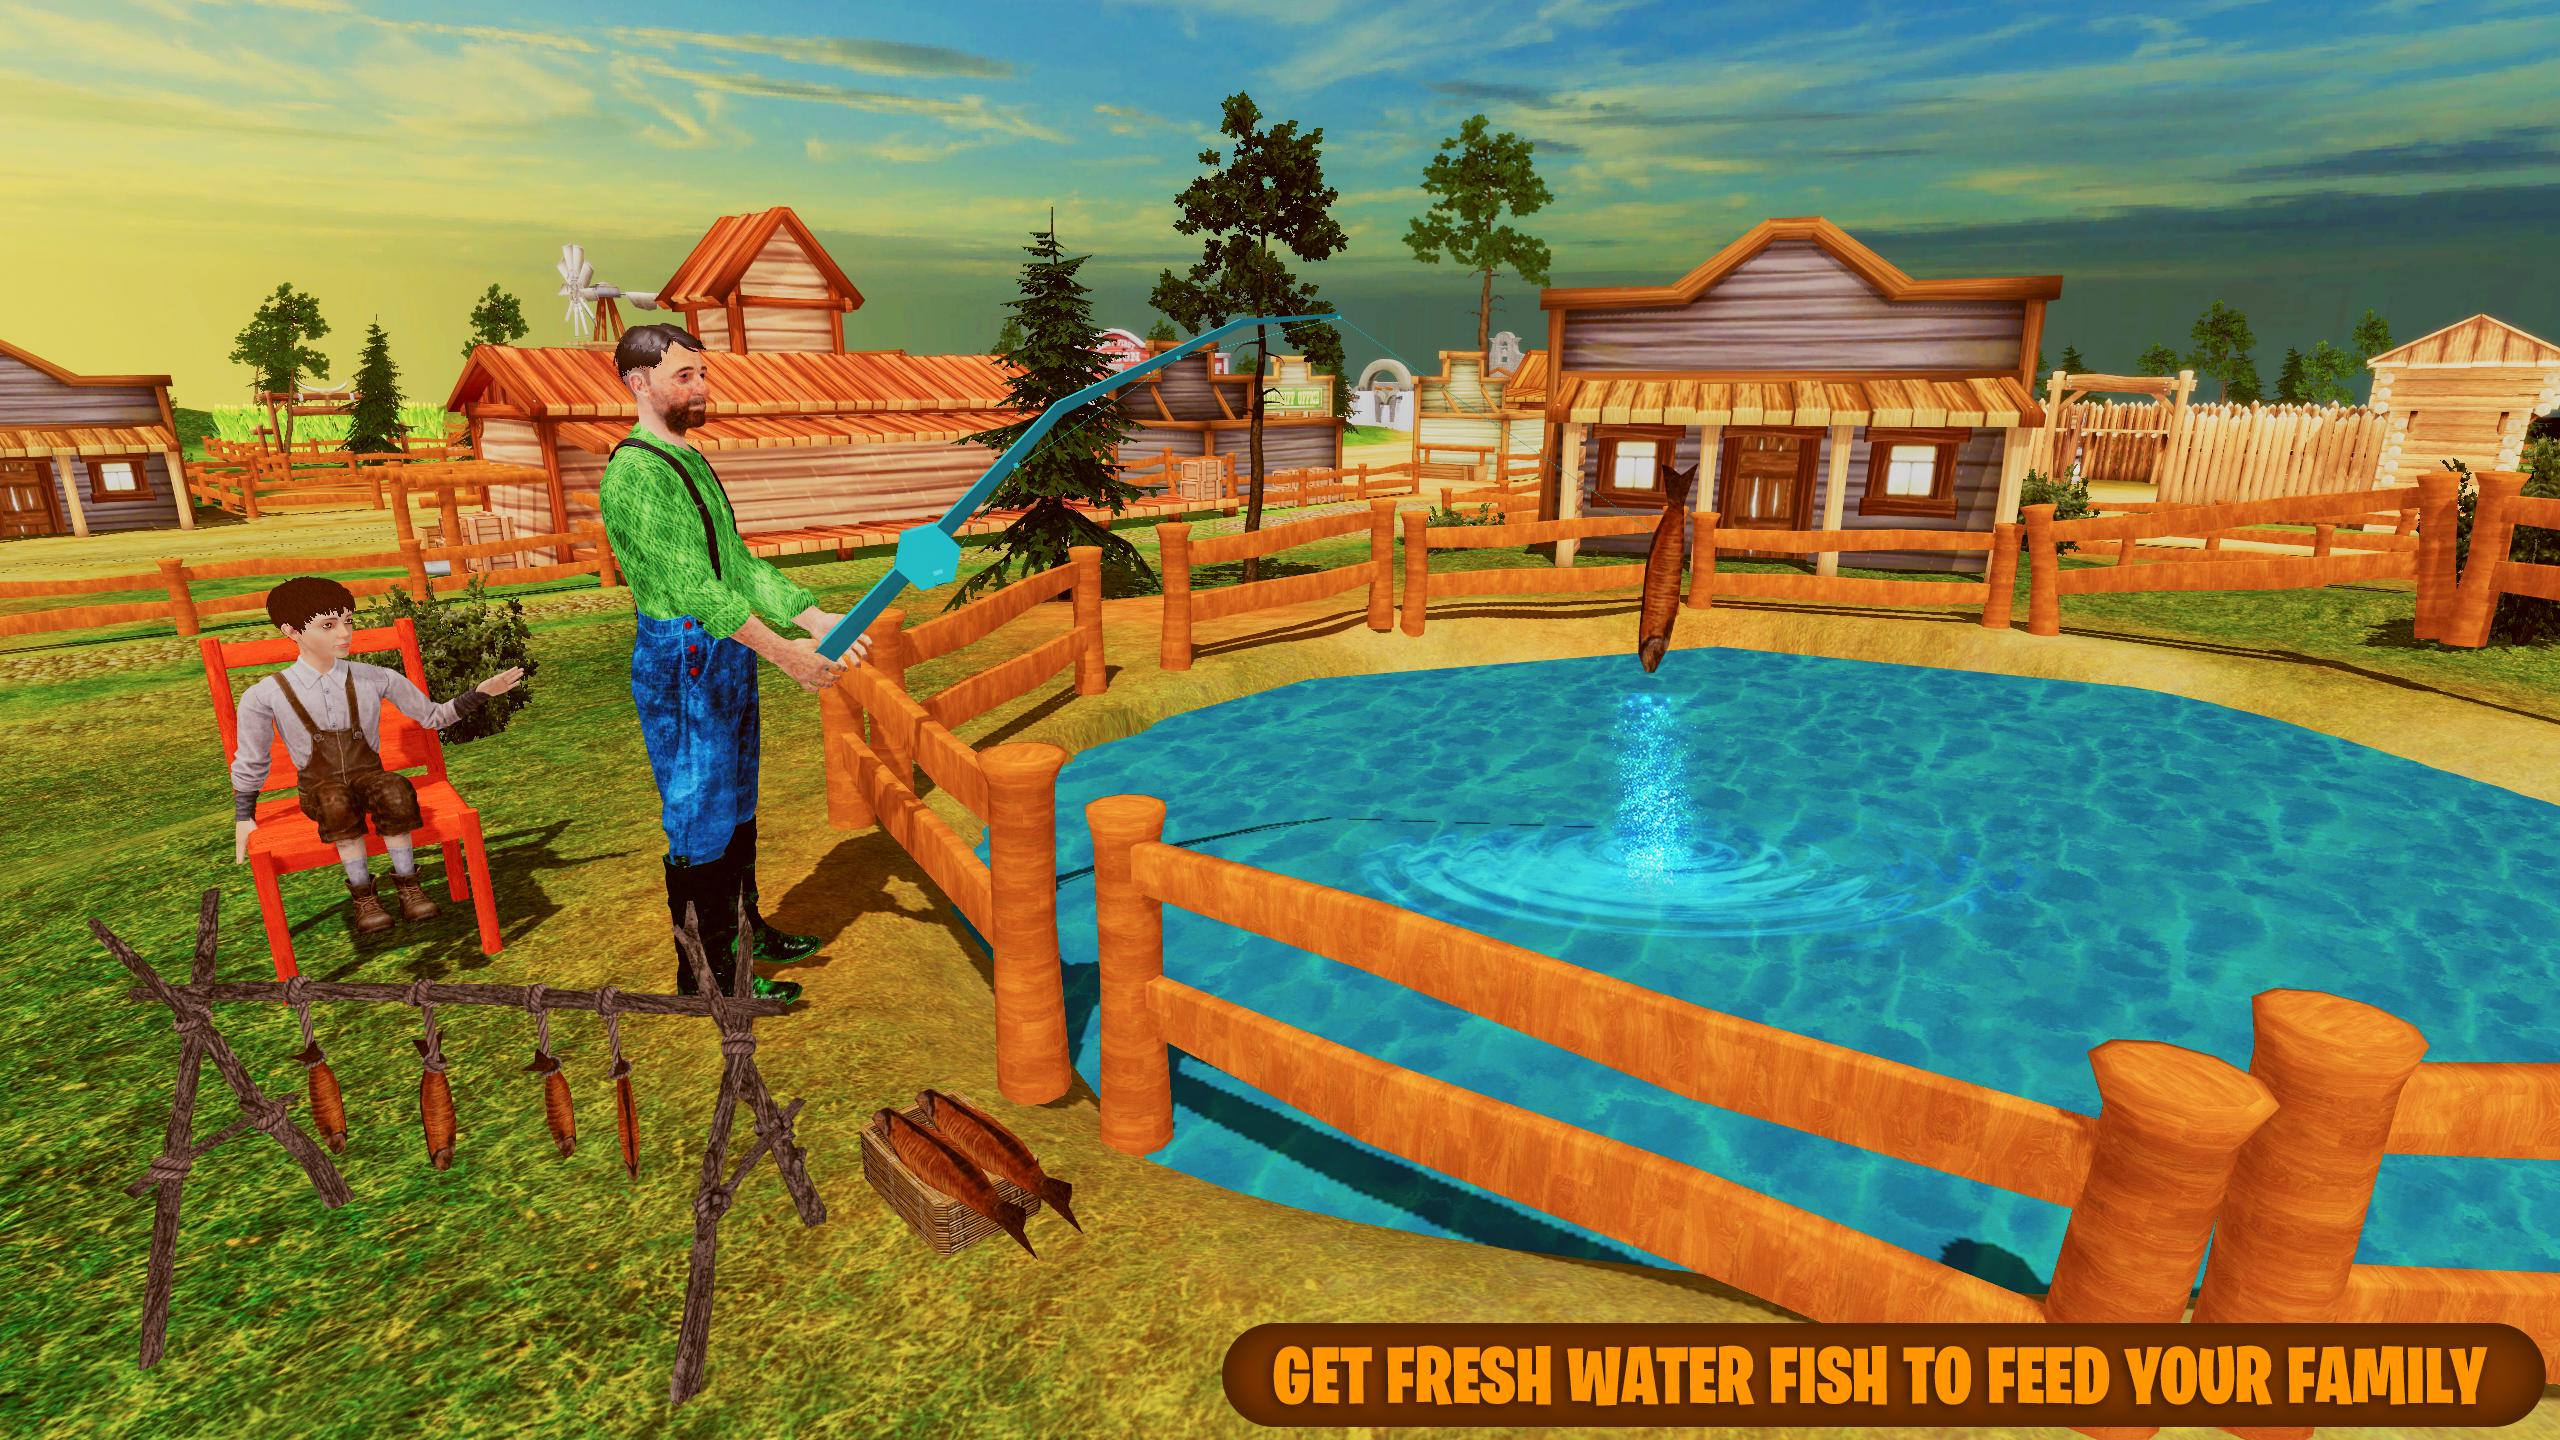 Download Ranch Simulator Animal Shelter android on PC